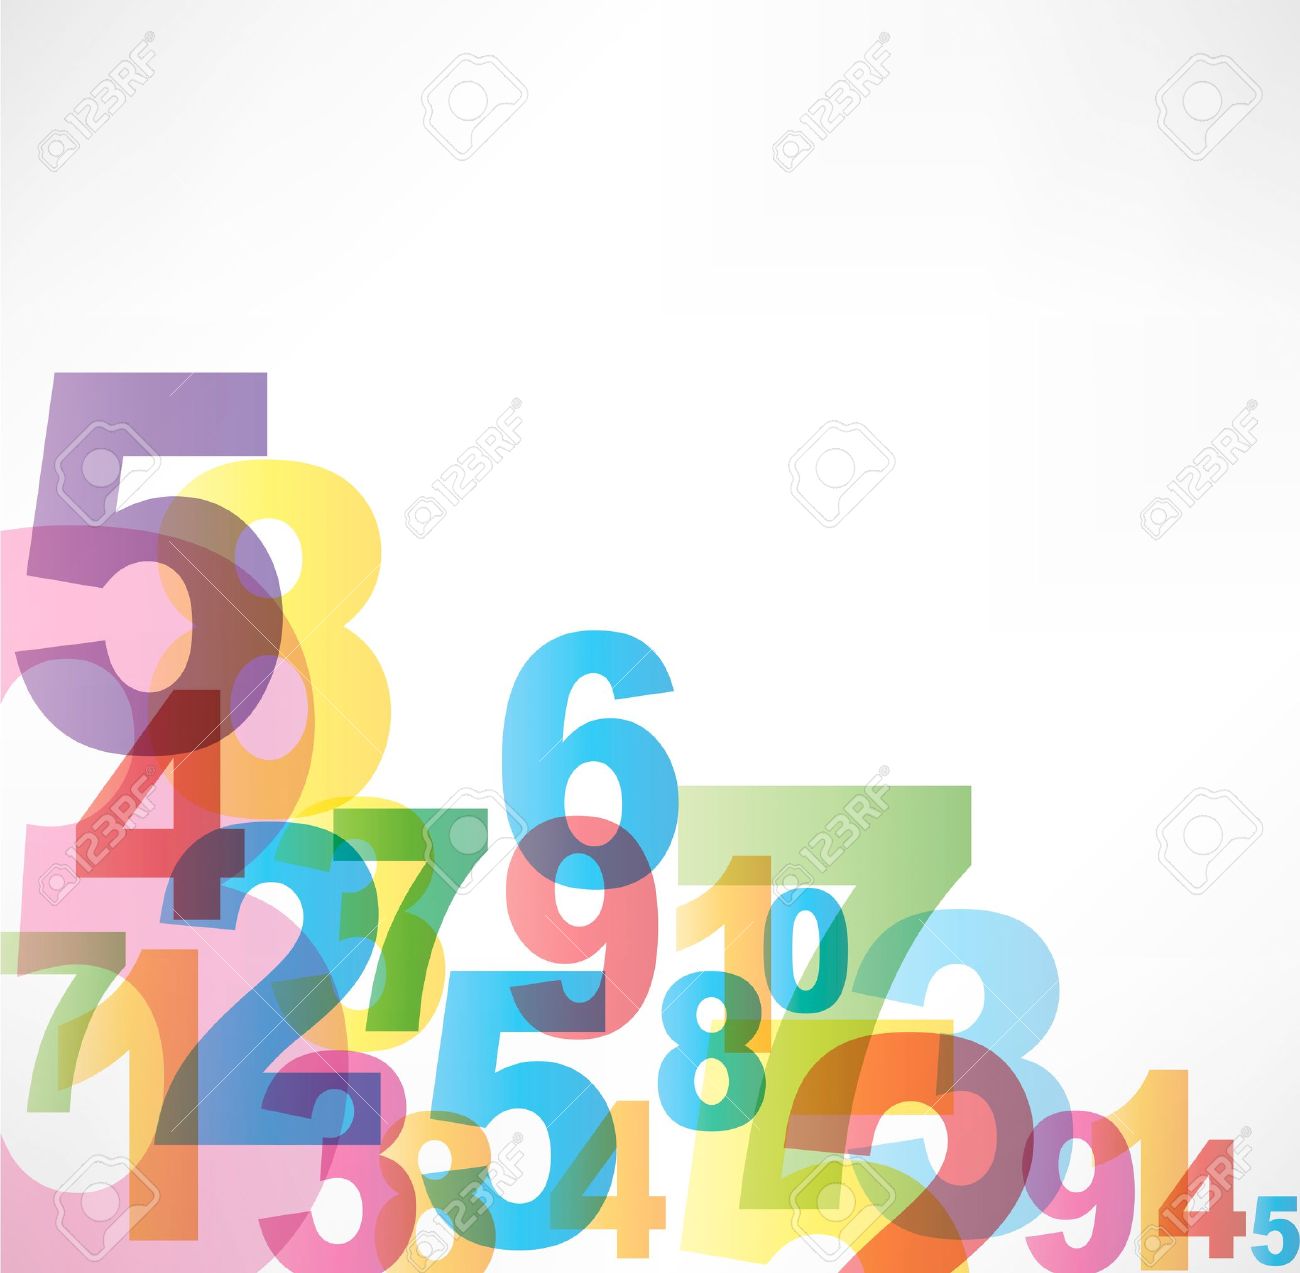 Jumbled numbers clipart.